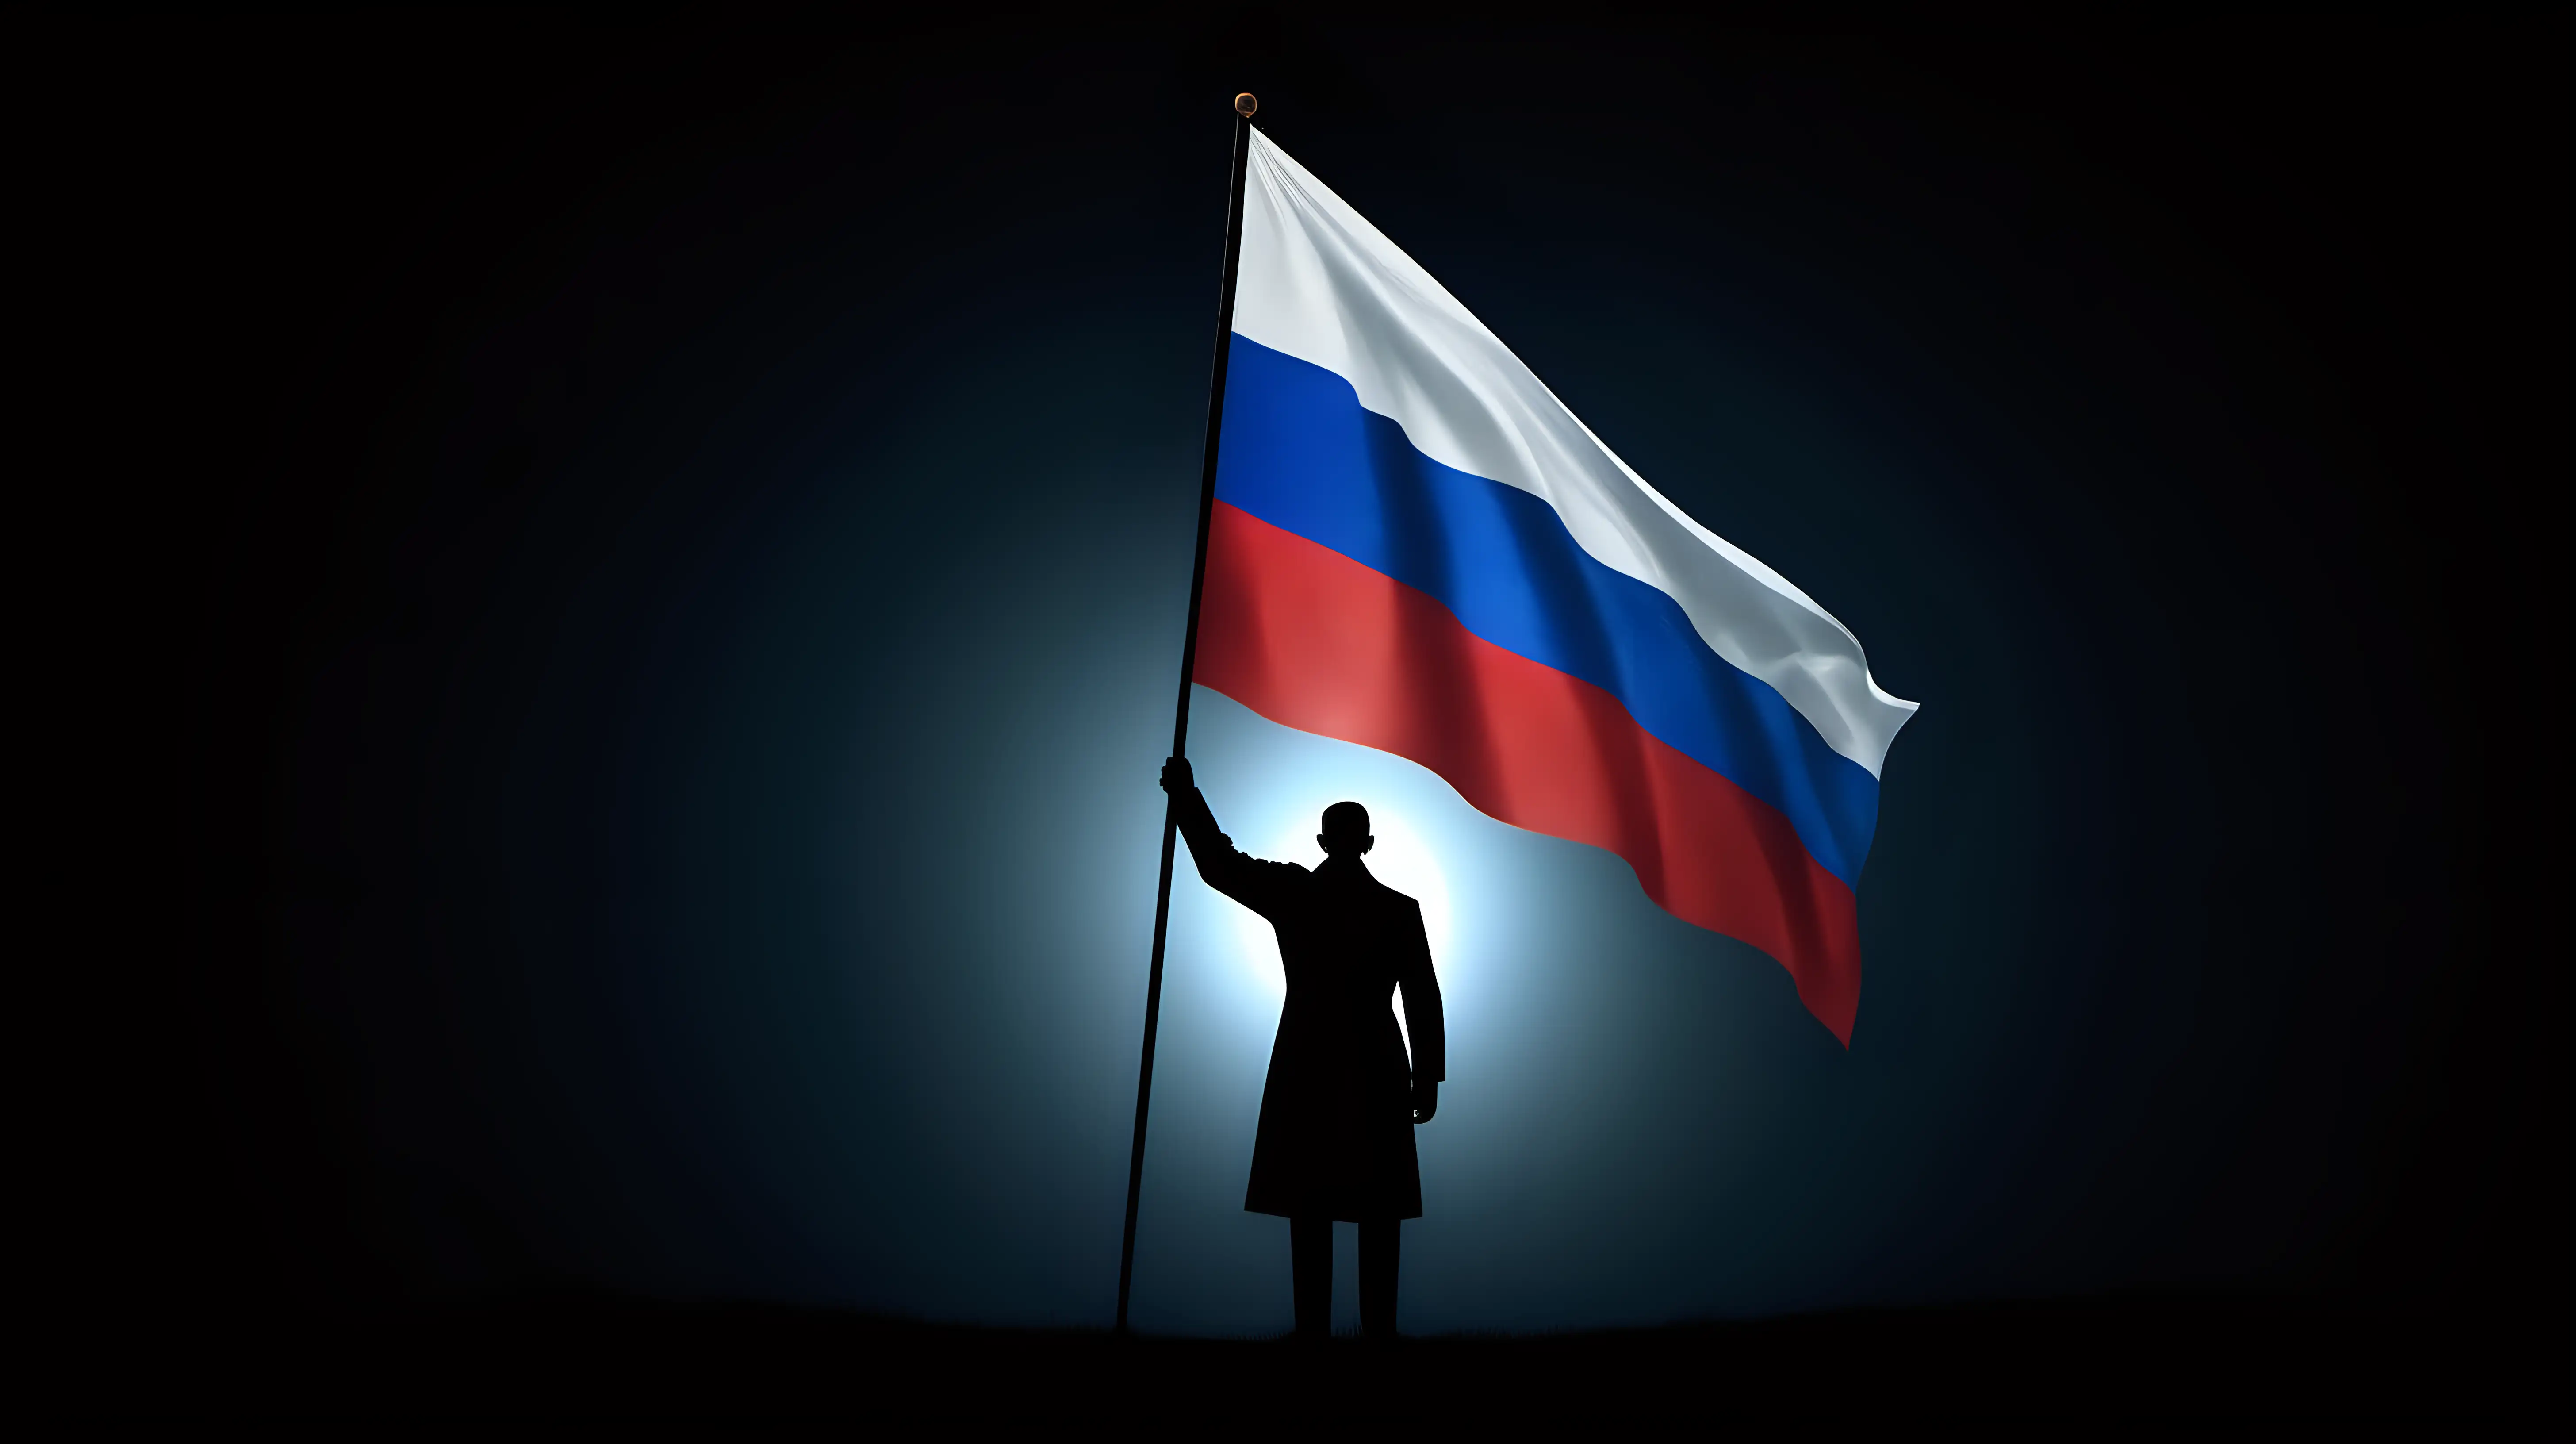 Illustrate the depth of national pride as a silhouette holds a glowing Russian flag in the darkness, highlighting the symbolic brilliance of their patriotism.